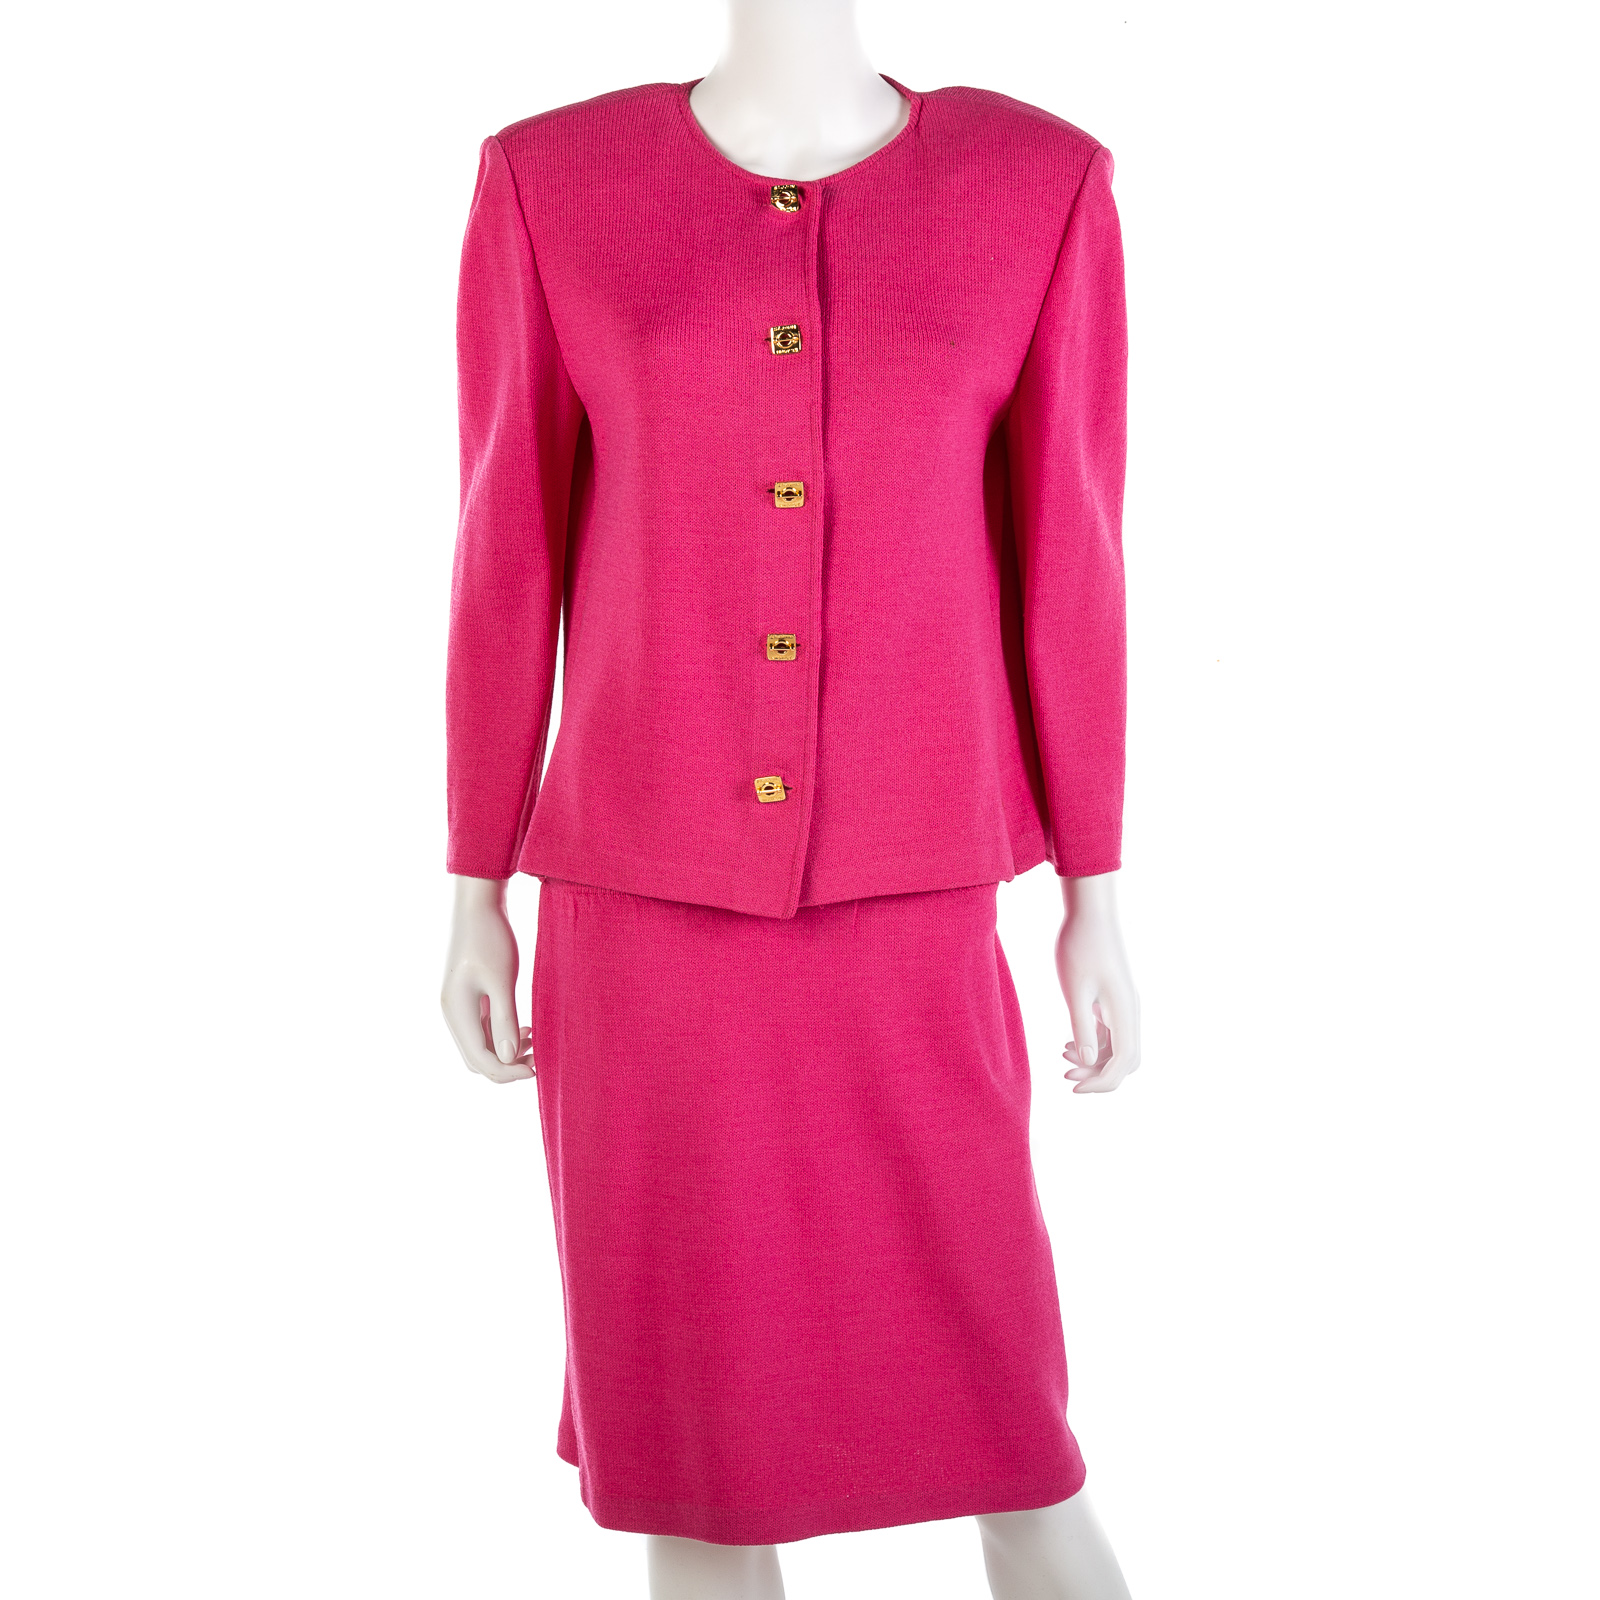 ST JOHN PINK KNITTED SUIT jacket 337134